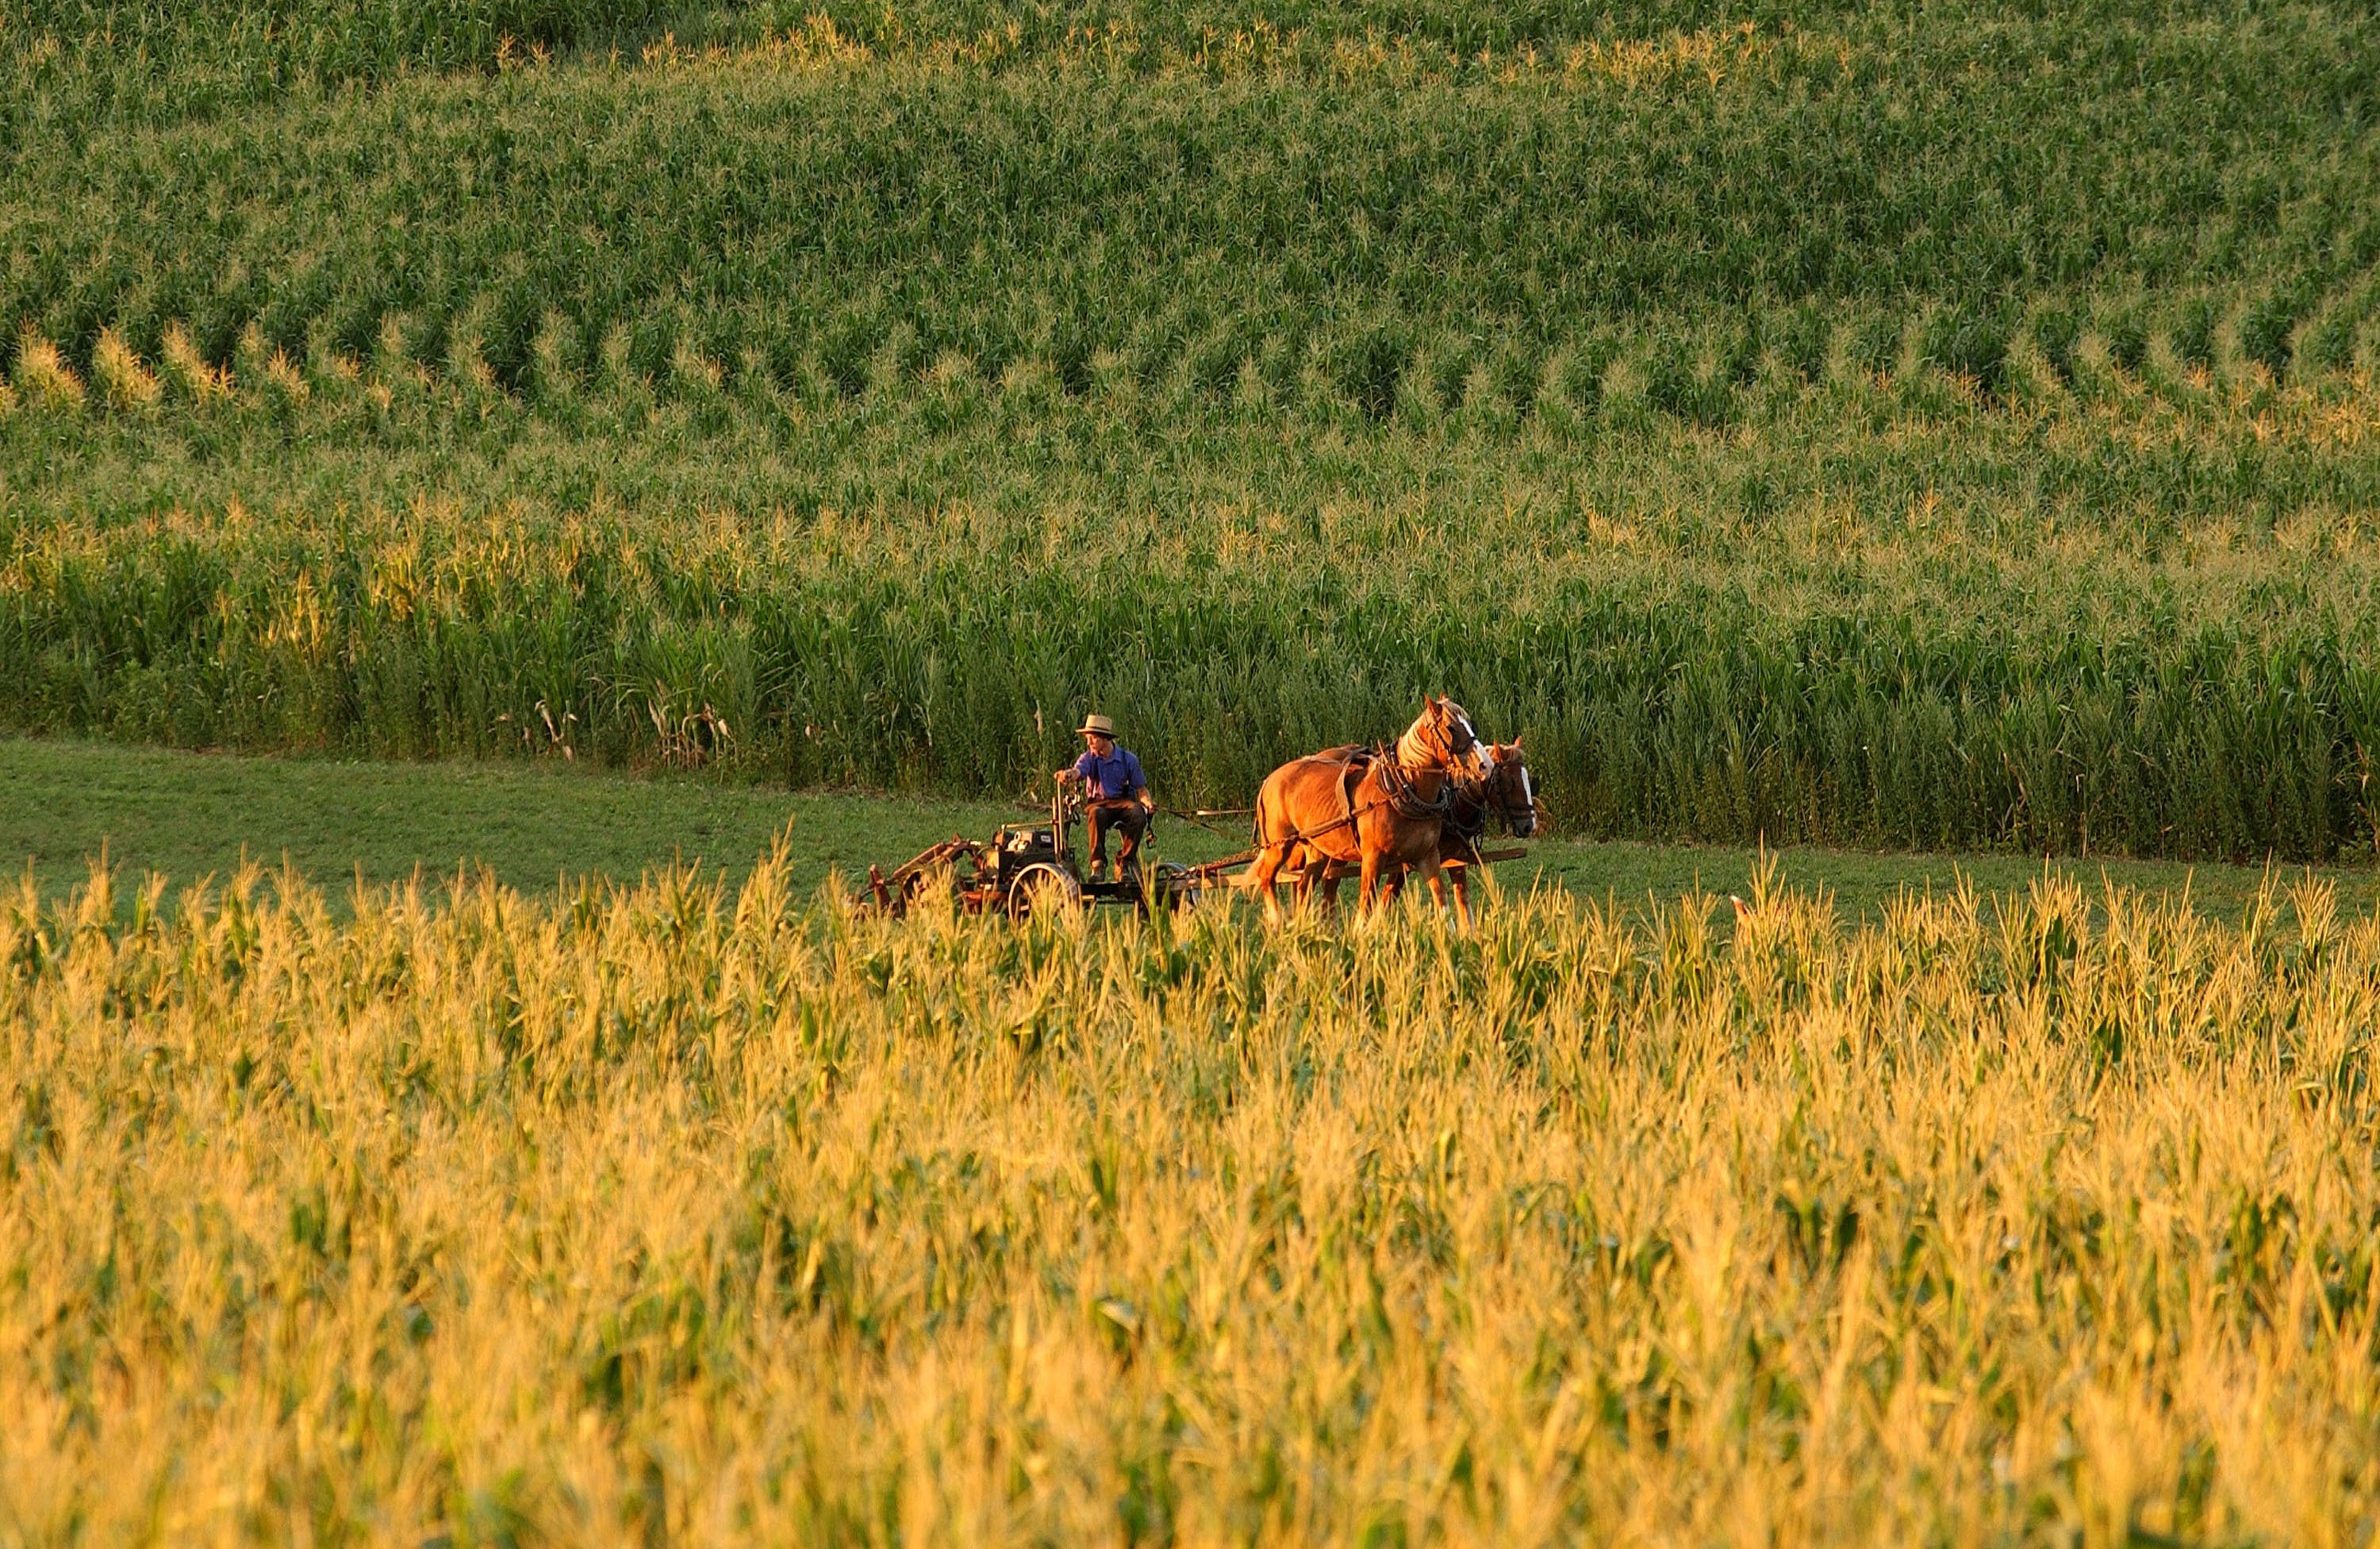 An Amish man ploughs his field August 7, 2002 in Lancaster County, Pennsylvania. (Photo by Spencer Platt/Getty Images)